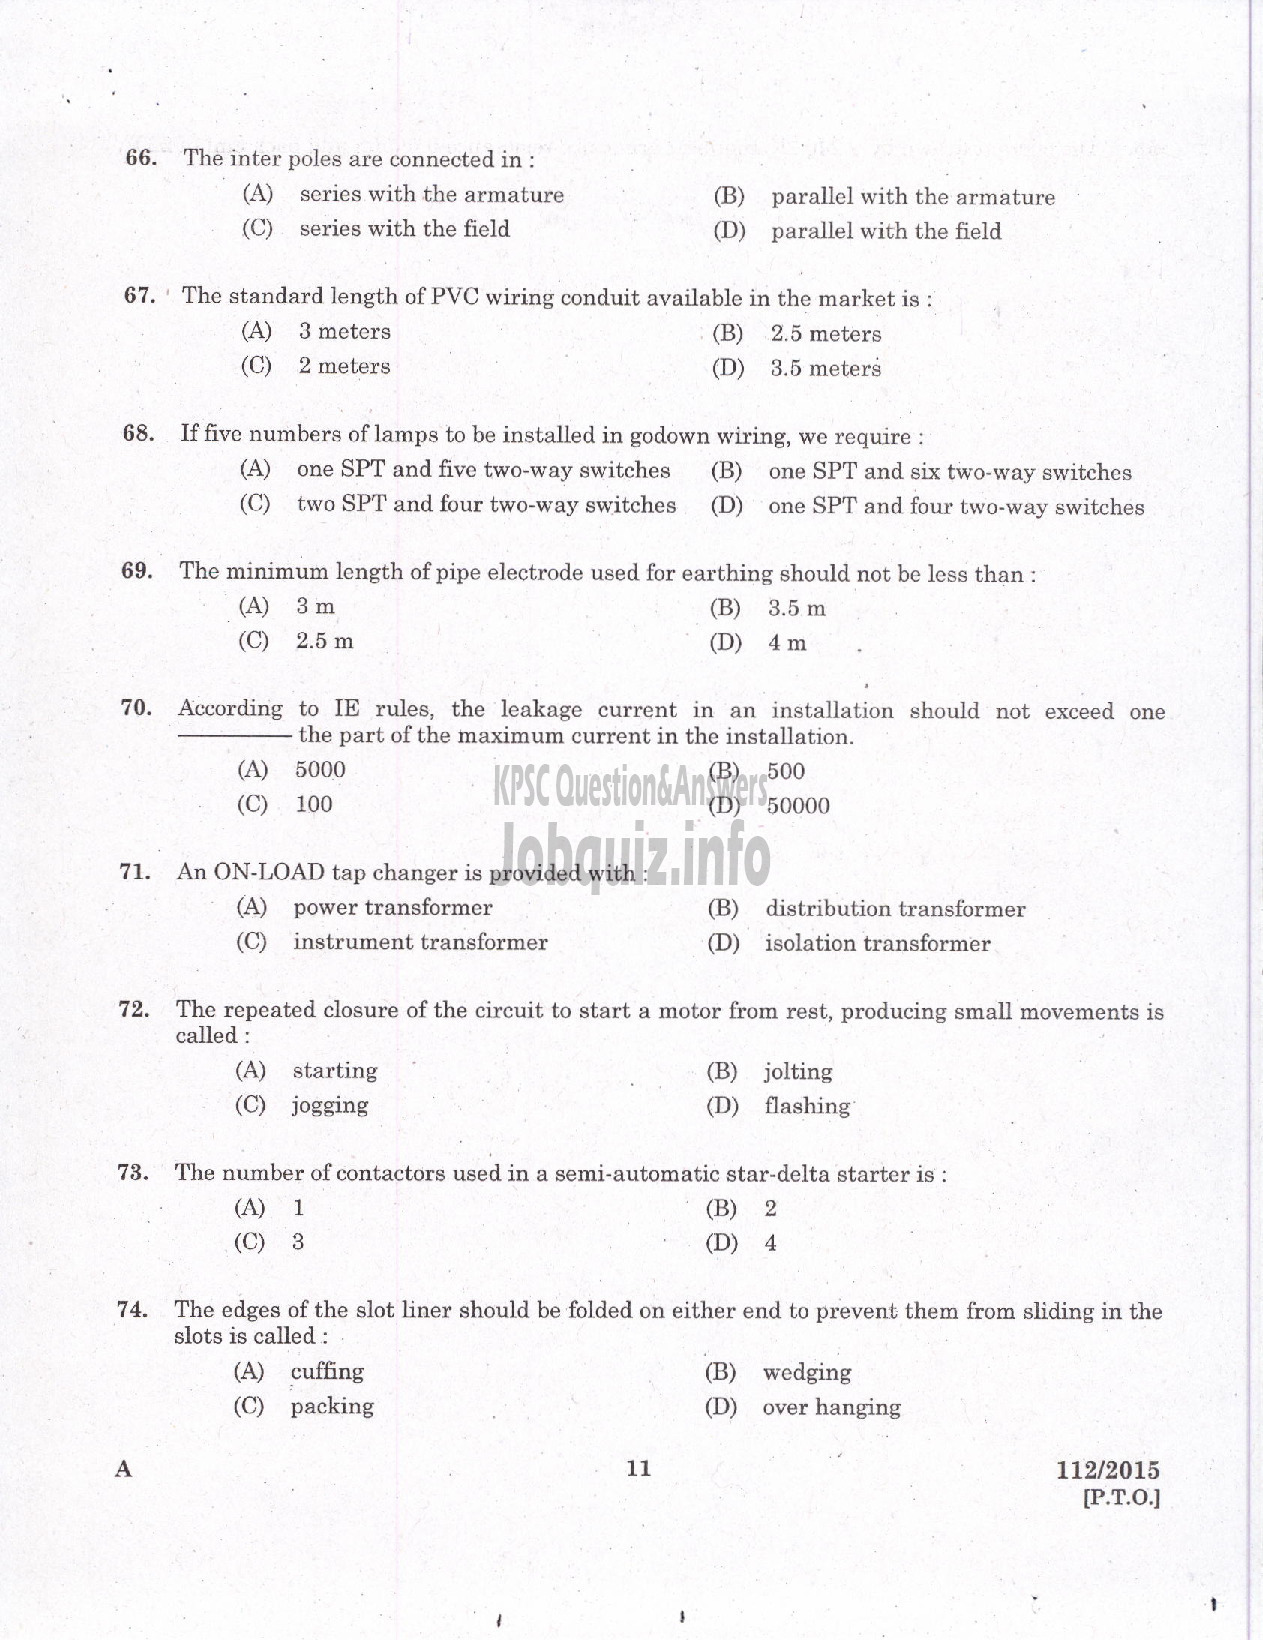 Kerala PSC Question Paper - TRADESMAN ELECTRICAL TECHNICAL EDUCATION/ELECTRICIAN GROUND WATER /ELECTRICIAN GR II PRINTING GOVT PRESSES ELECTRICIAN AGRICULTURE /ELECTRICIAN GR II THE KERALA CERAMICS LTD-9